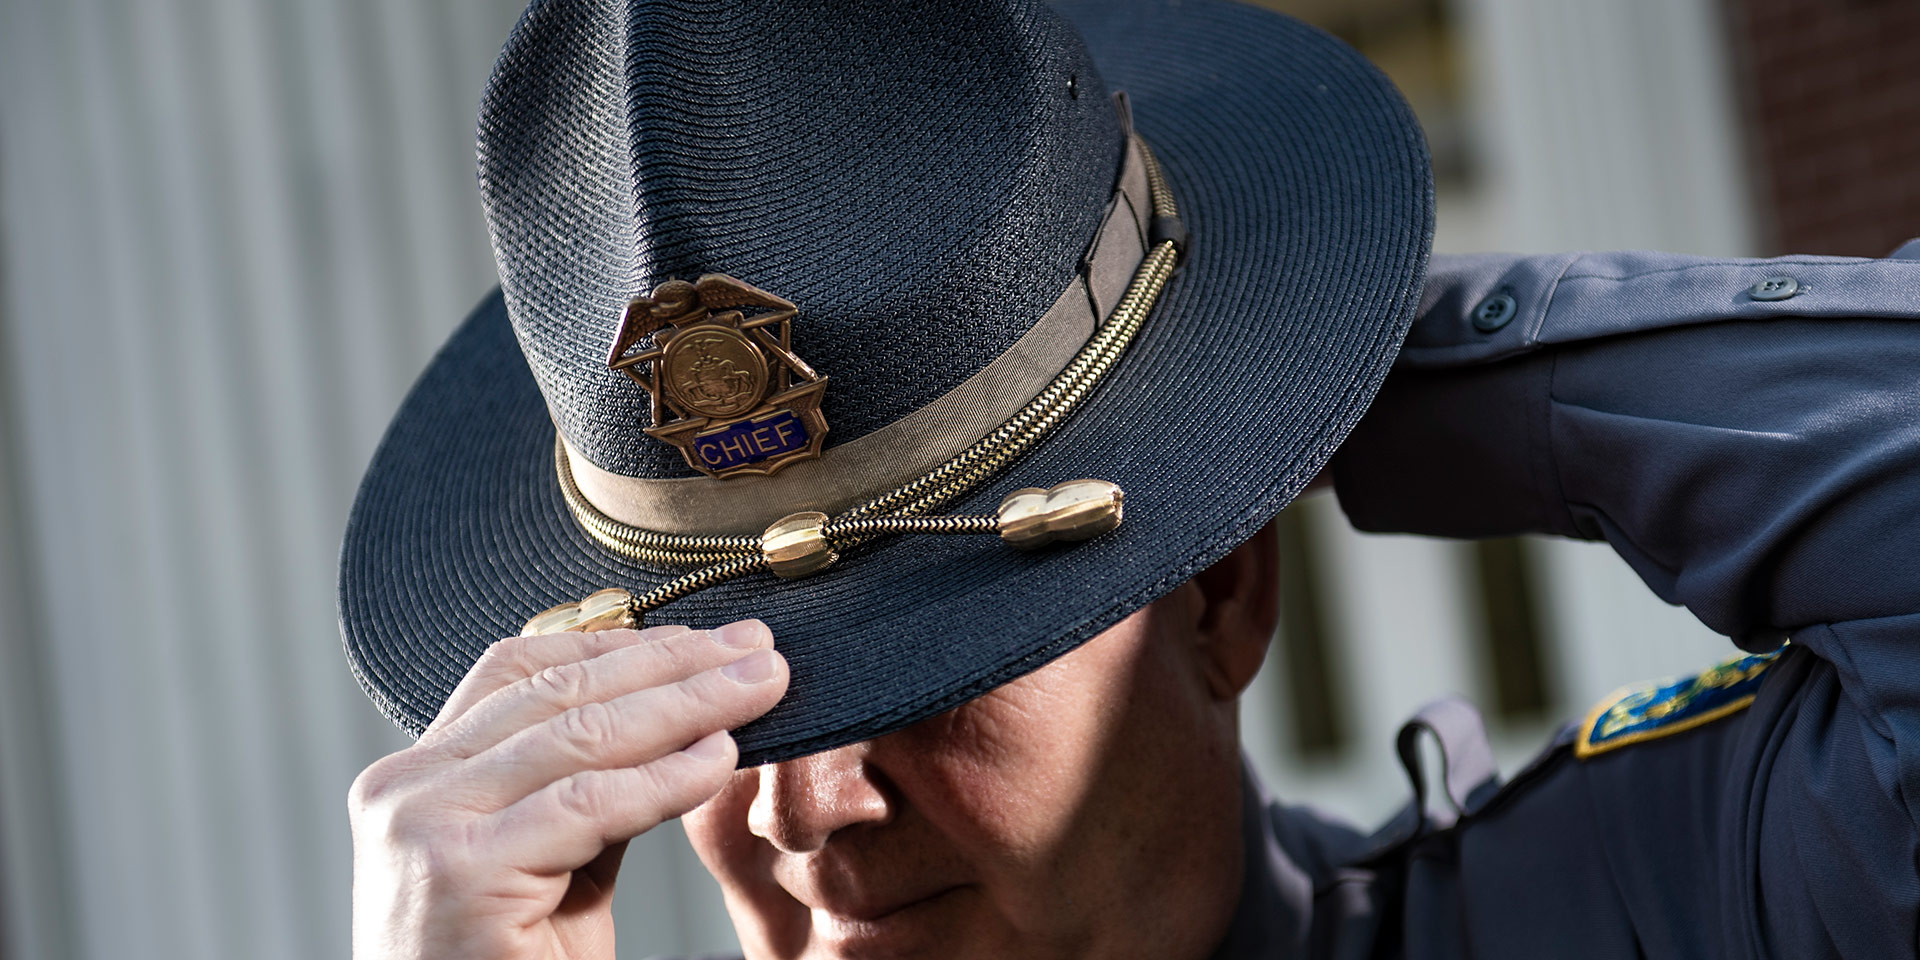 A police officer puts on a hat